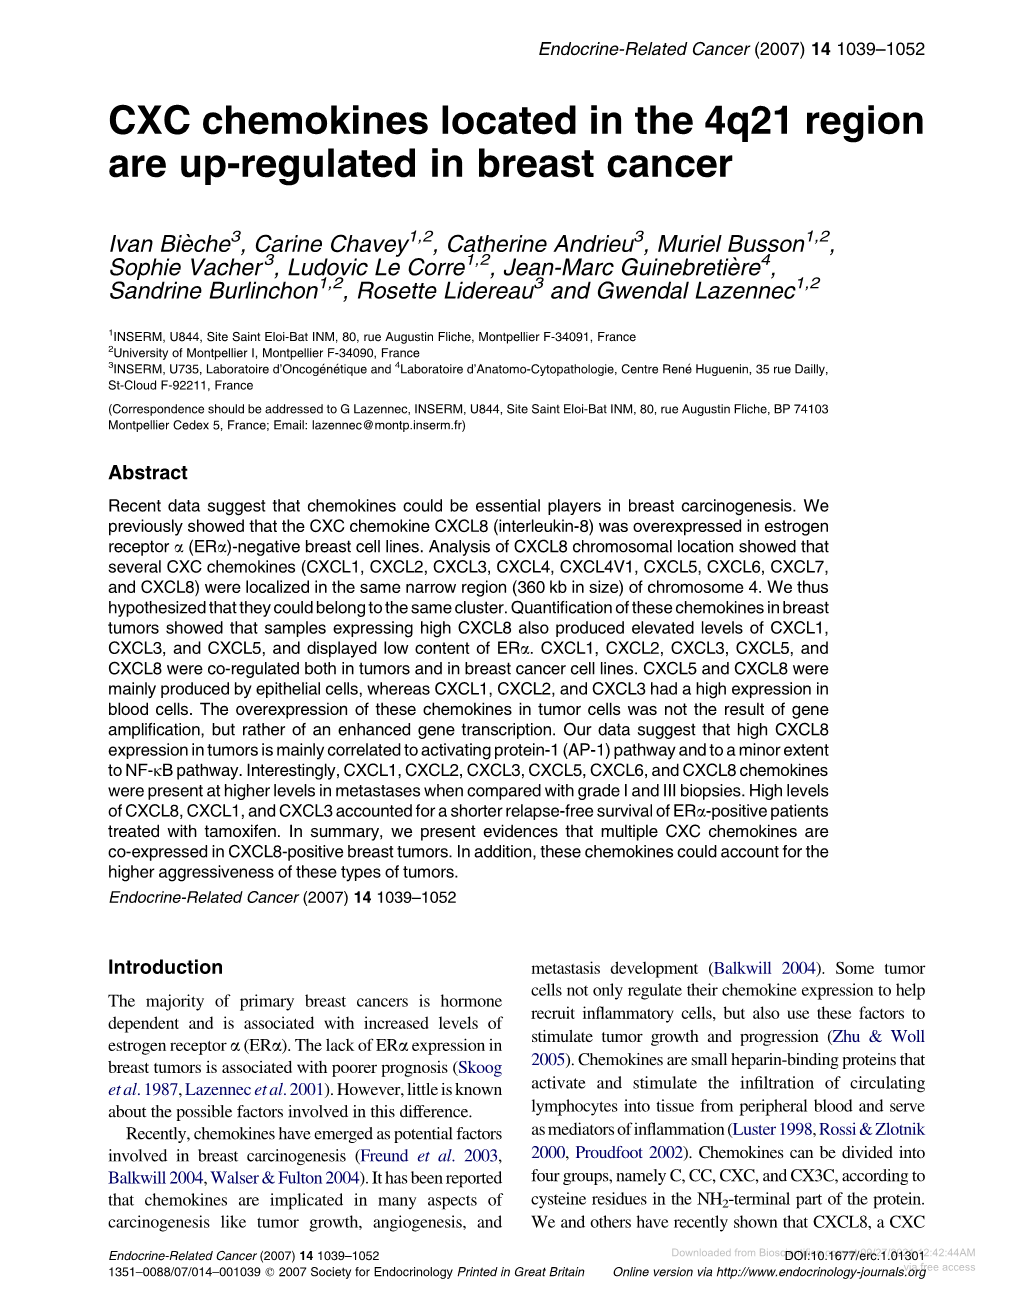 CXC Chemokines Located in the 4Q21 Region Are Up-Regulated in Breast Cancer